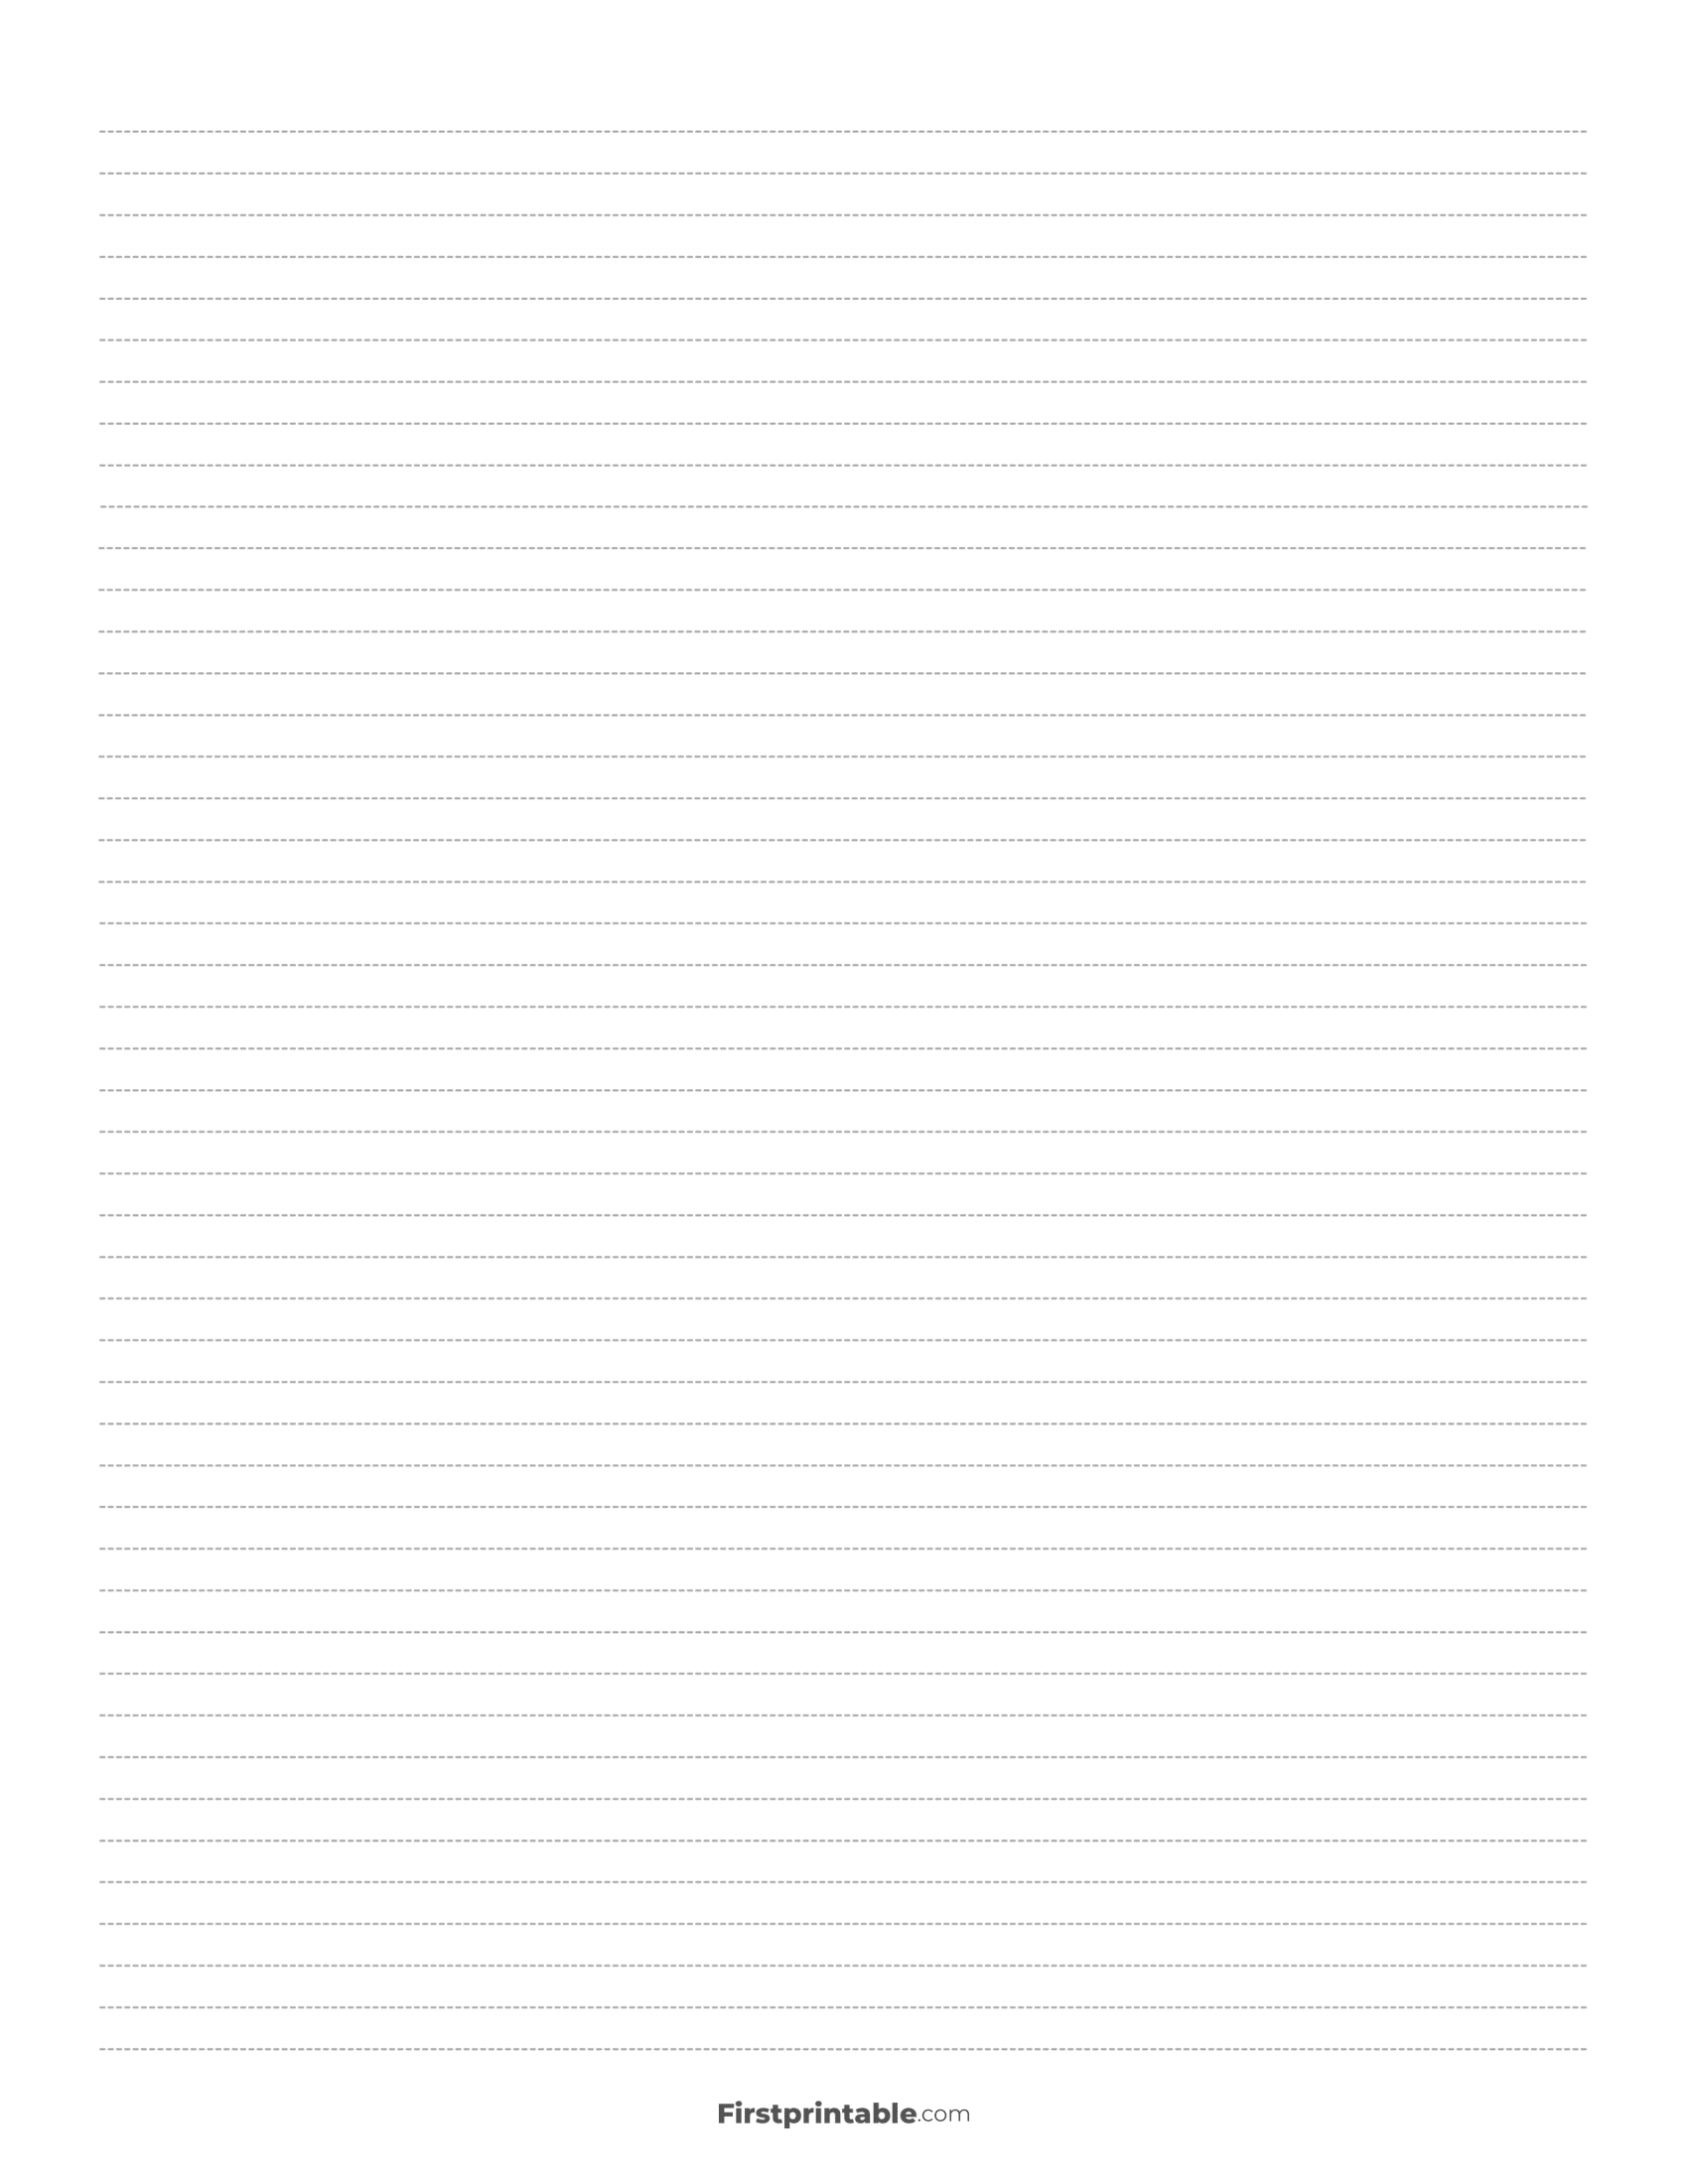 Printable Dash Lined Paper Template - Ruled 5mm